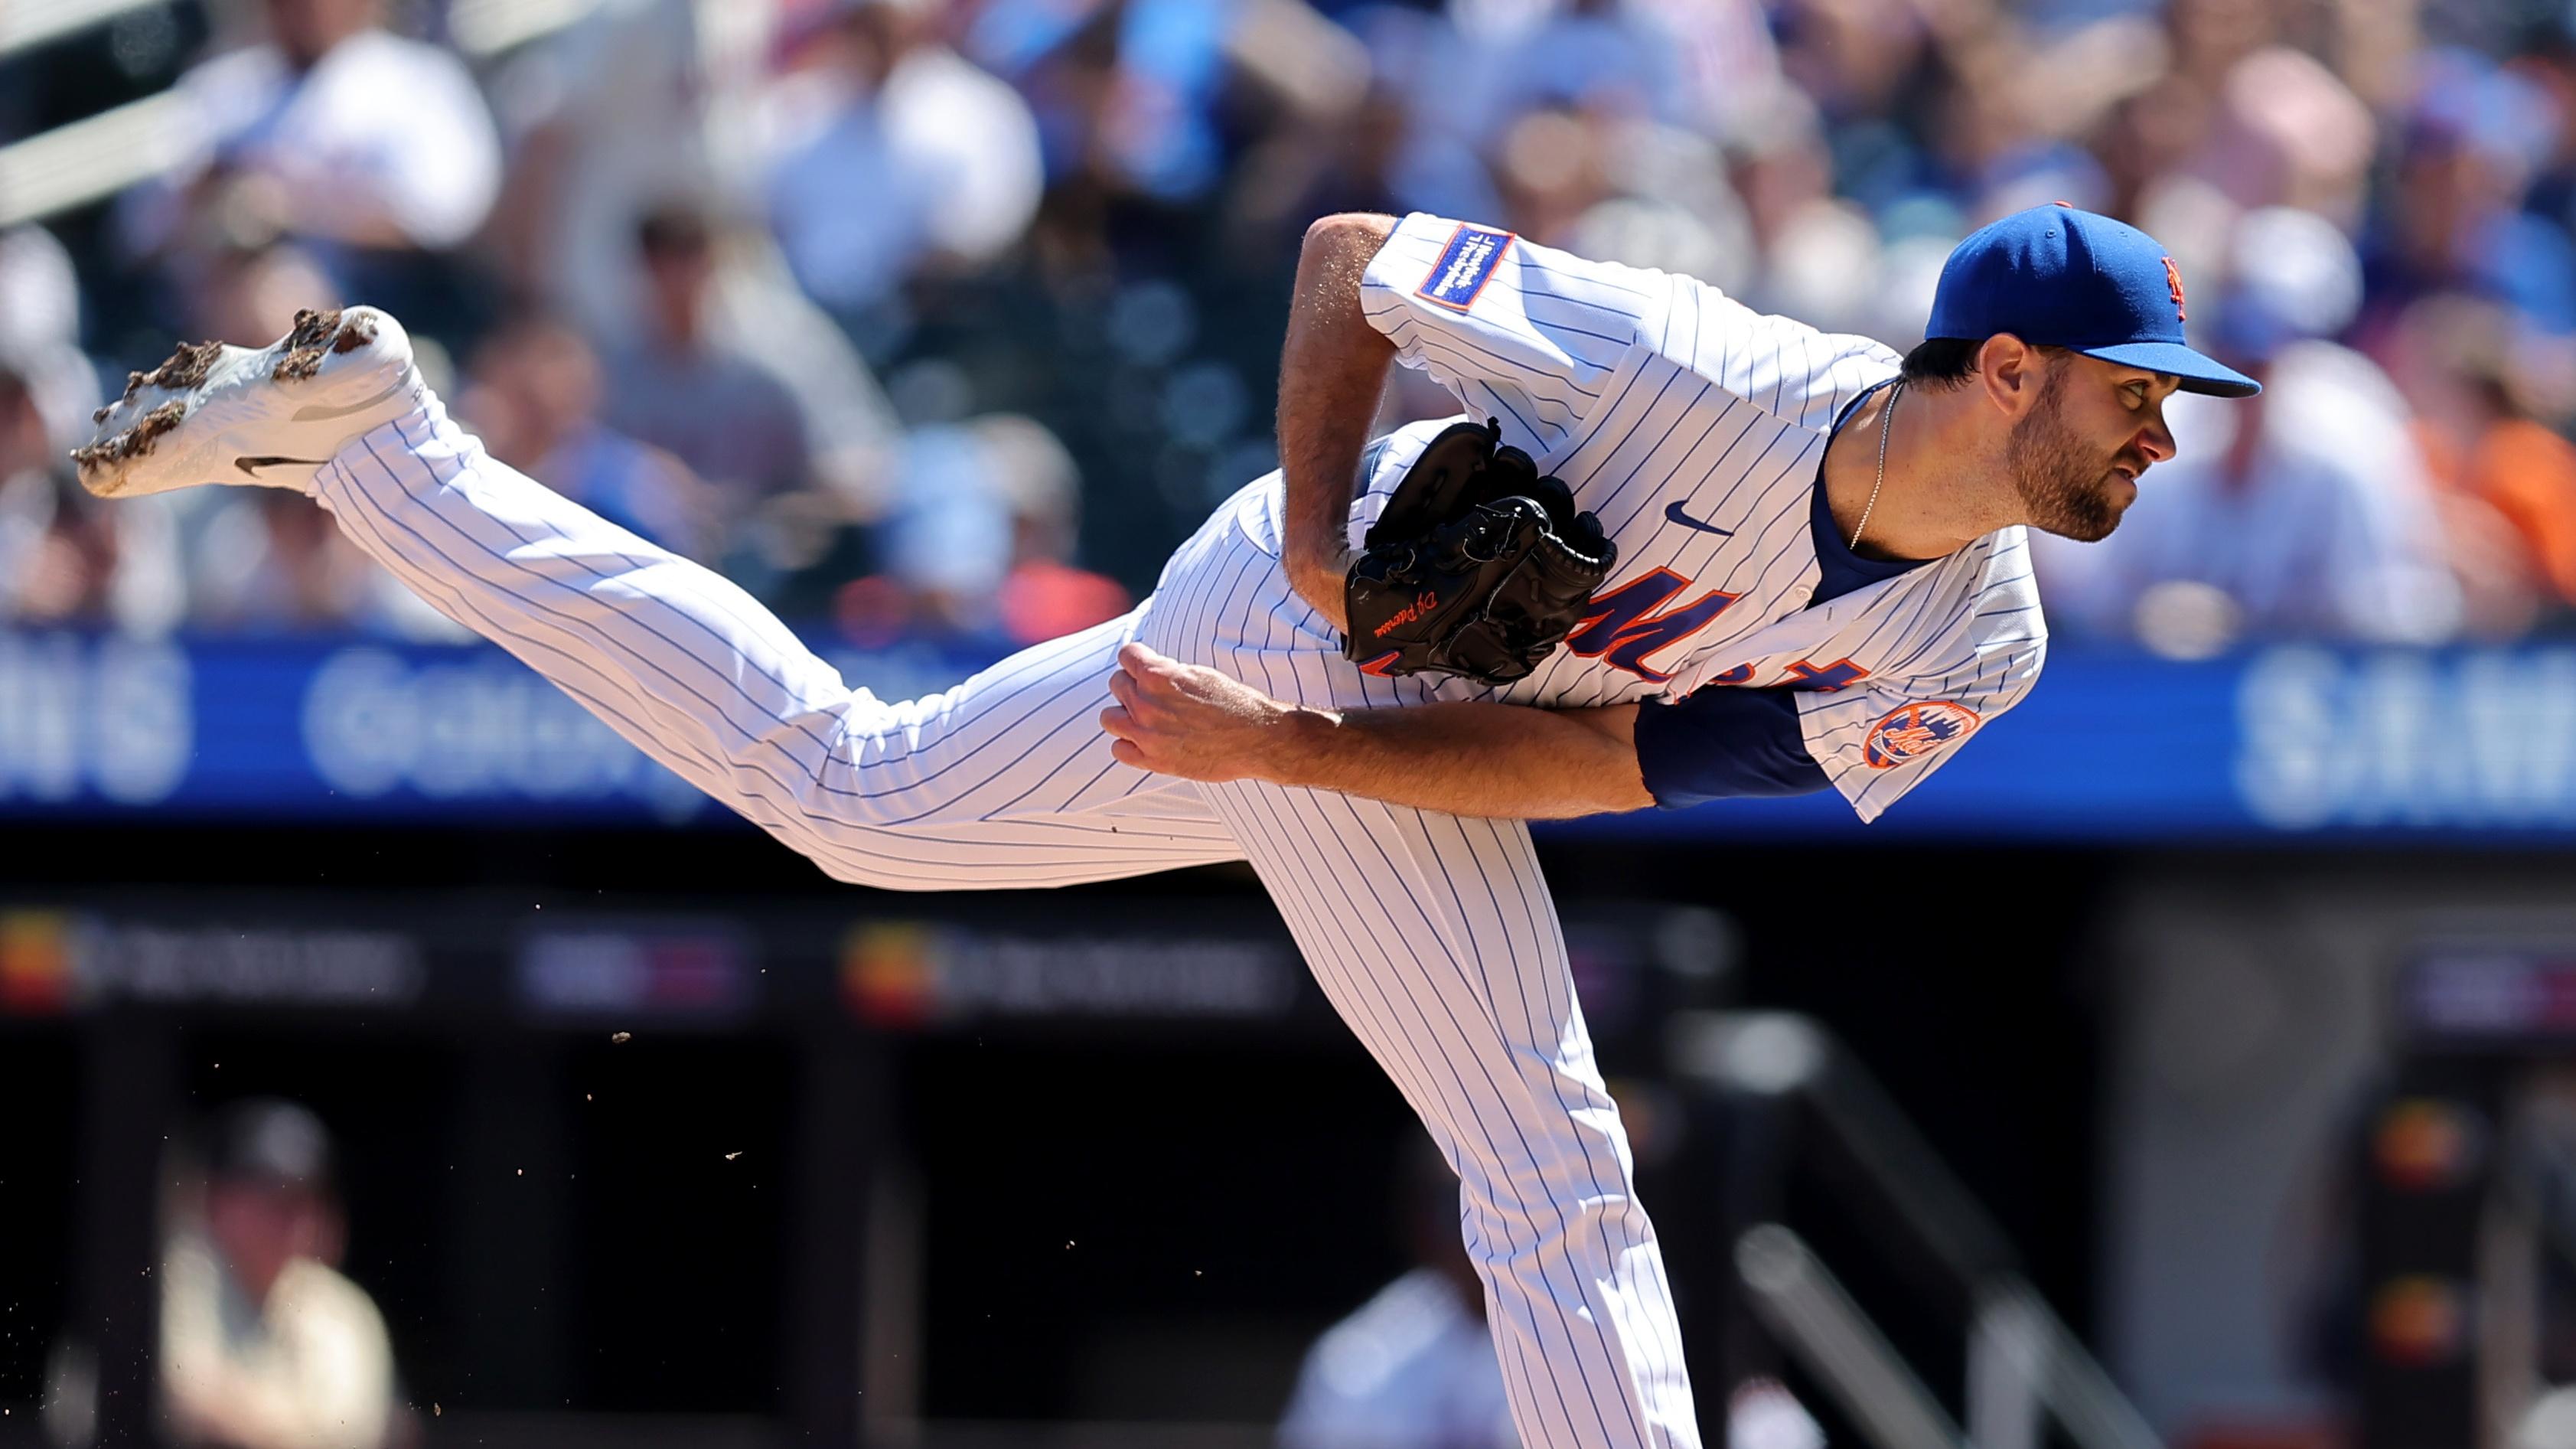 New York Mets starting pitcher David Peterson (23) follows through on a pitch against the Los Angeles Angels during the second inning at Citi Field / Brad Penner - USA TODAY Sports